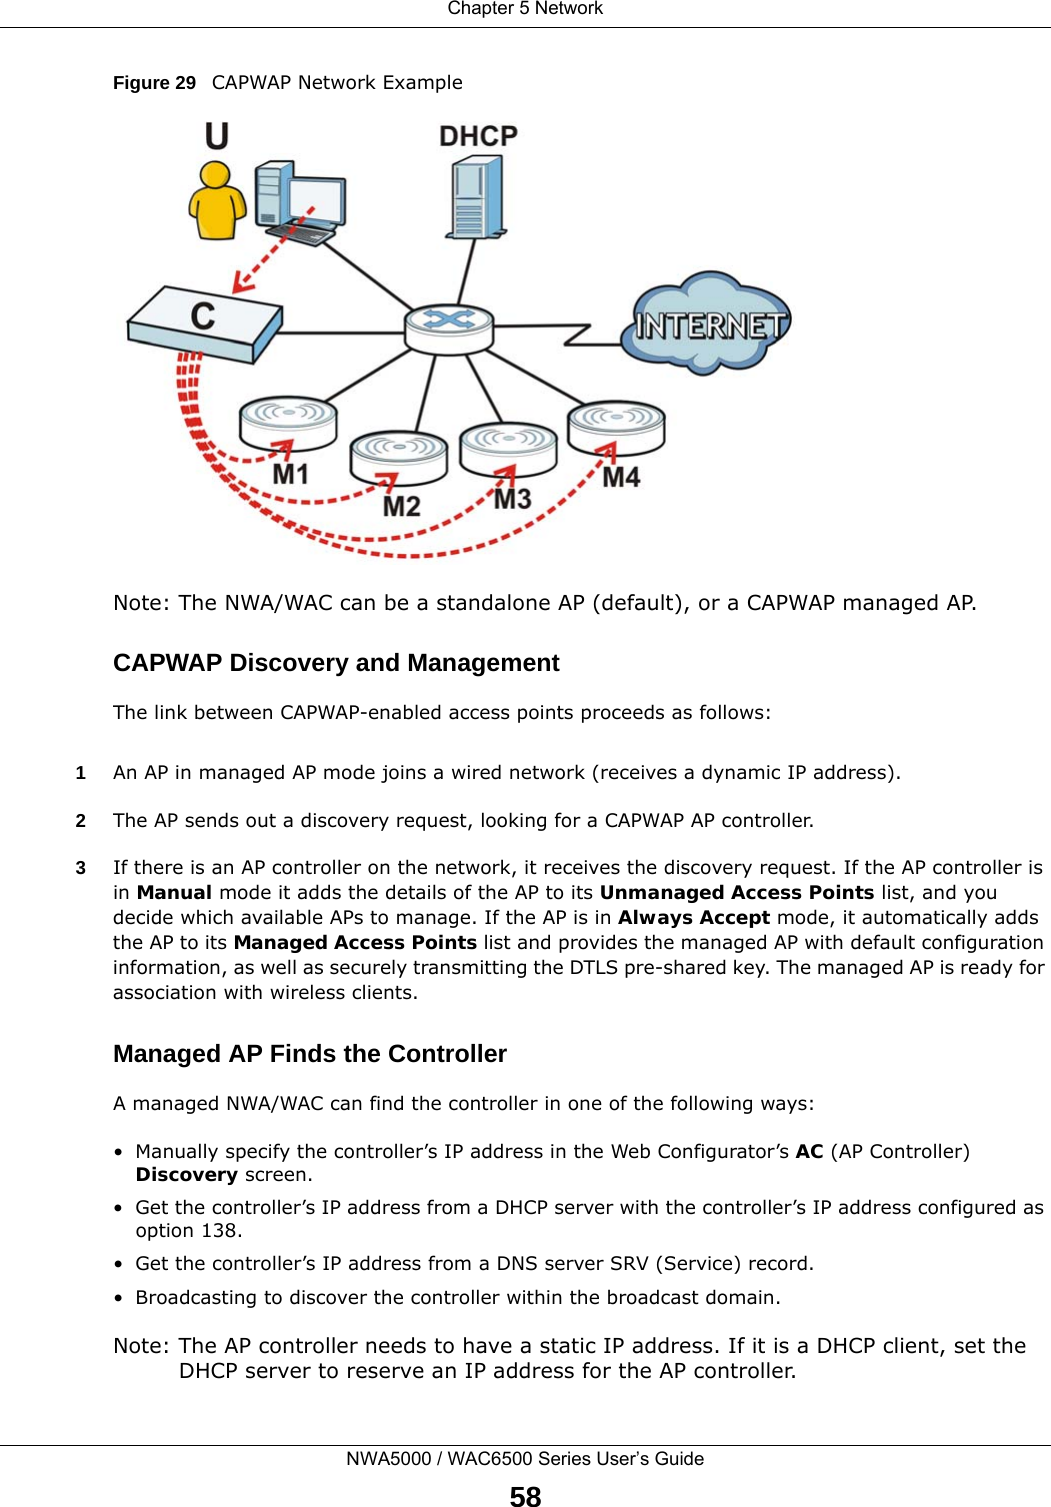 Chapter 5 NetworkNWA5000 / WAC6500 Series User’s Guide58Figure 29   CAPWAP Network ExampleNote: The NWA/WAC can be a standalone AP (default), or a CAPWAP managed AP.CAPWAP Discovery and ManagementThe link between CAPWAP-enabled access points proceeds as follows:1An AP in managed AP mode joins a wired network (receives a dynamic IP address).2The AP sends out a discovery request, looking for a CAPWAP AP controller.3If there is an AP controller on the network, it receives the discovery request. If the AP controller is in Manual mode it adds the details of the AP to its Unmanaged Access Points list, and you decide which available APs to manage. If the AP is in Always Accept mode, it automatically adds the AP to its Managed Access Points list and provides the managed AP with default configuration information, as well as securely transmitting the DTLS pre-shared key. The managed AP is ready for association with wireless clients.Managed AP Finds the ControllerA managed NWA/WAC can find the controller in one of the following ways:• Manually specify the controller’s IP address in the Web Configurator’s AC (AP Controller) Discovery screen. • Get the controller’s IP address from a DHCP server with the controller’s IP address configured as option 138.• Get the controller’s IP address from a DNS server SRV (Service) record.• Broadcasting to discover the controller within the broadcast domain.Note: The AP controller needs to have a static IP address. If it is a DHCP client, set the DHCP server to reserve an IP address for the AP controller.